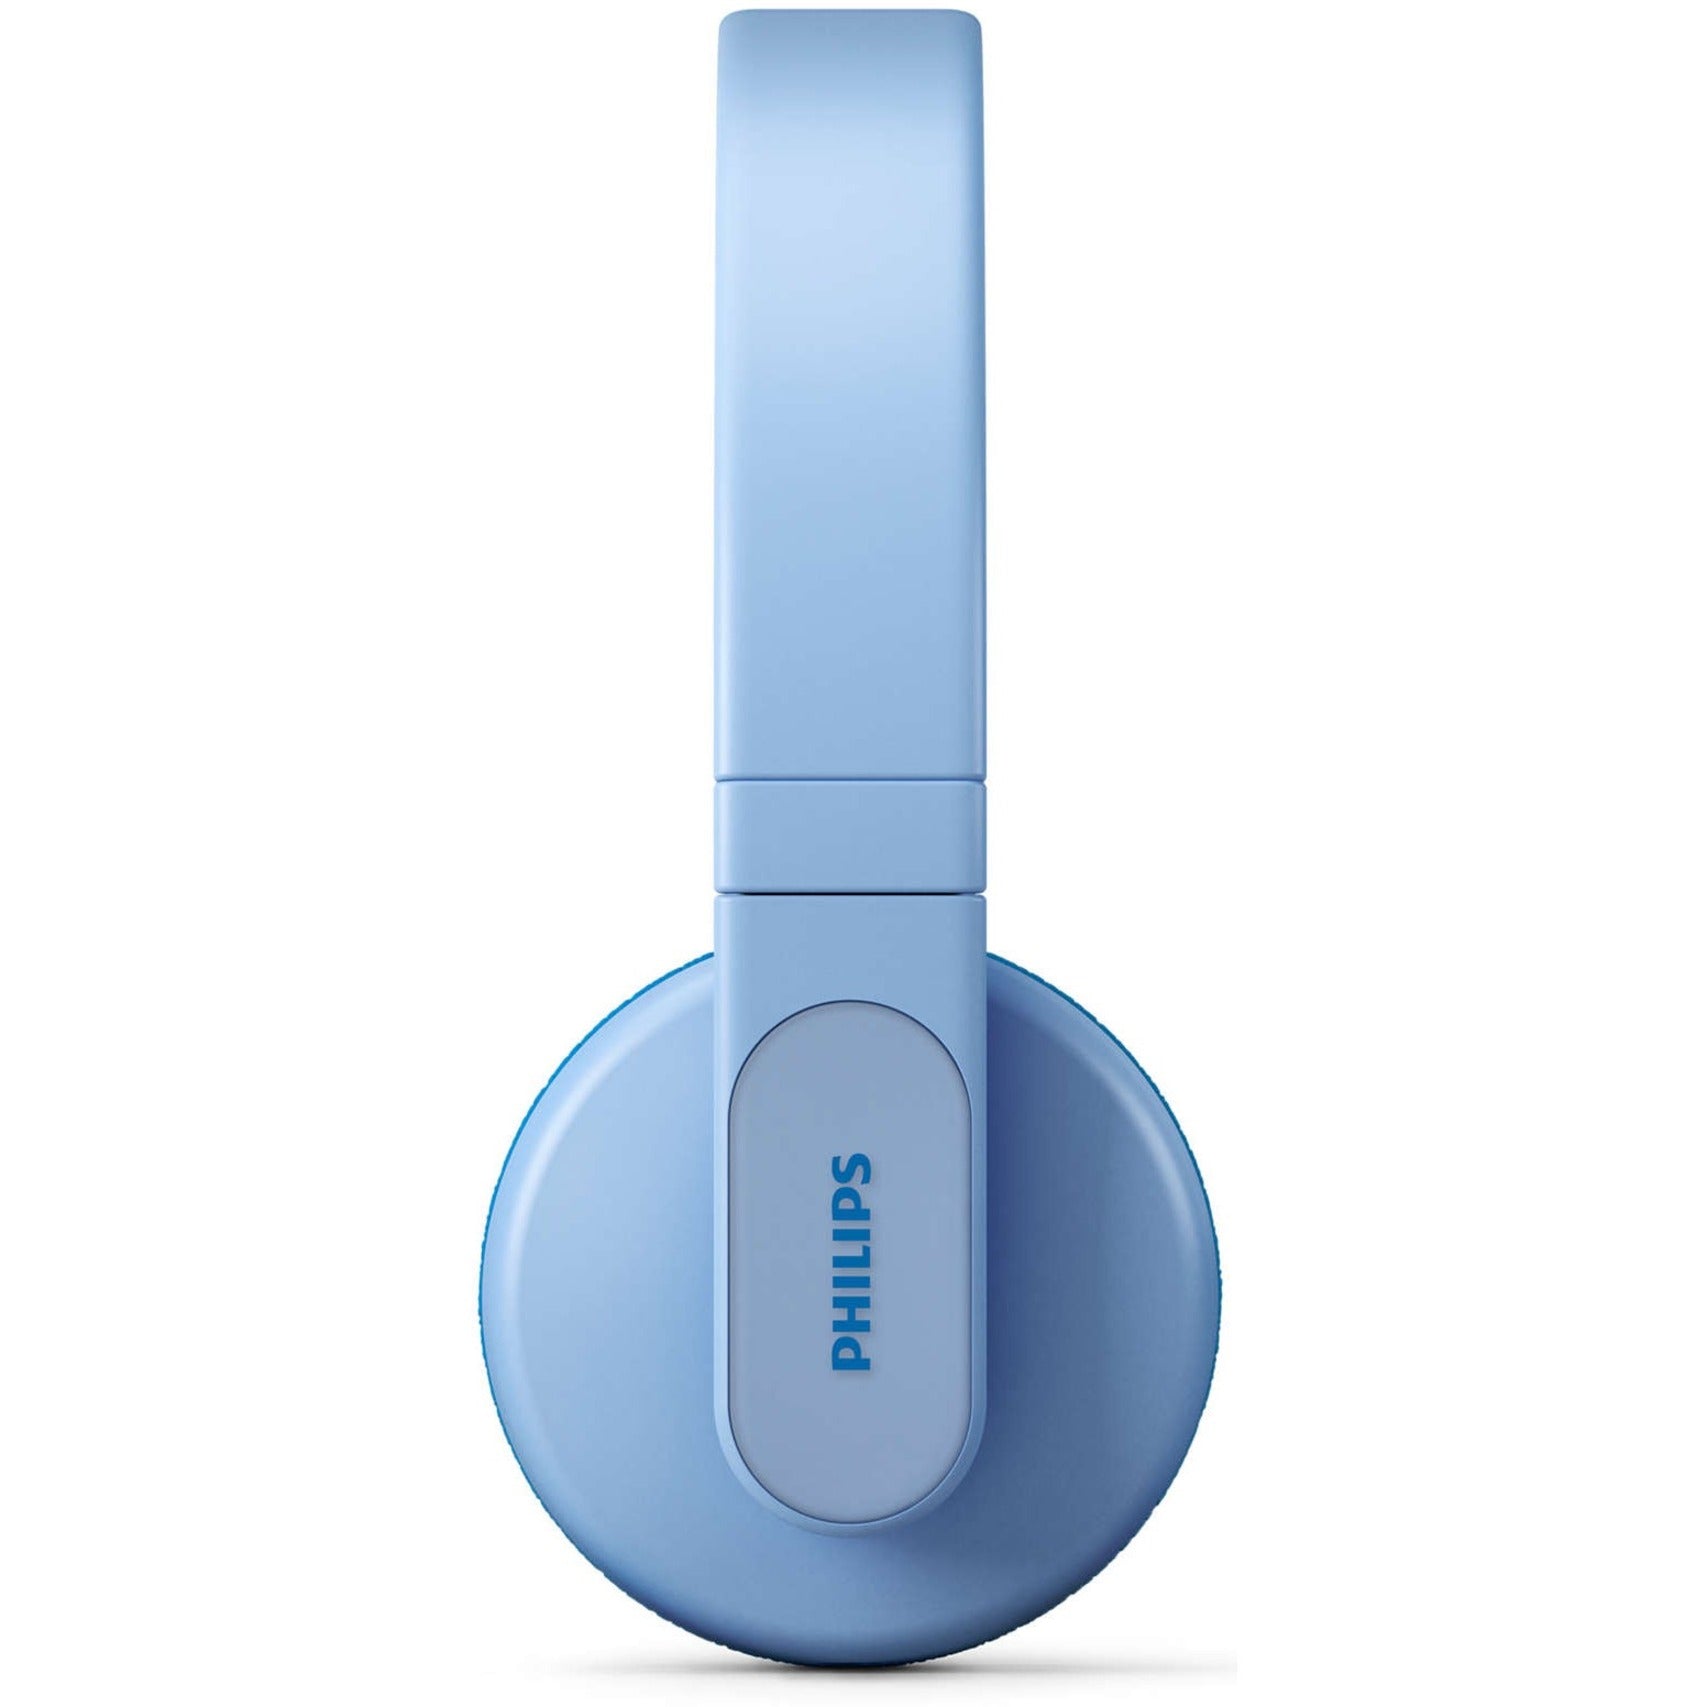 Philips TAK4206BL/00 Headset, Lightweight, Foldable, Rechargeable Battery, Bluetooth, 28 Hour Battery Life, Blue